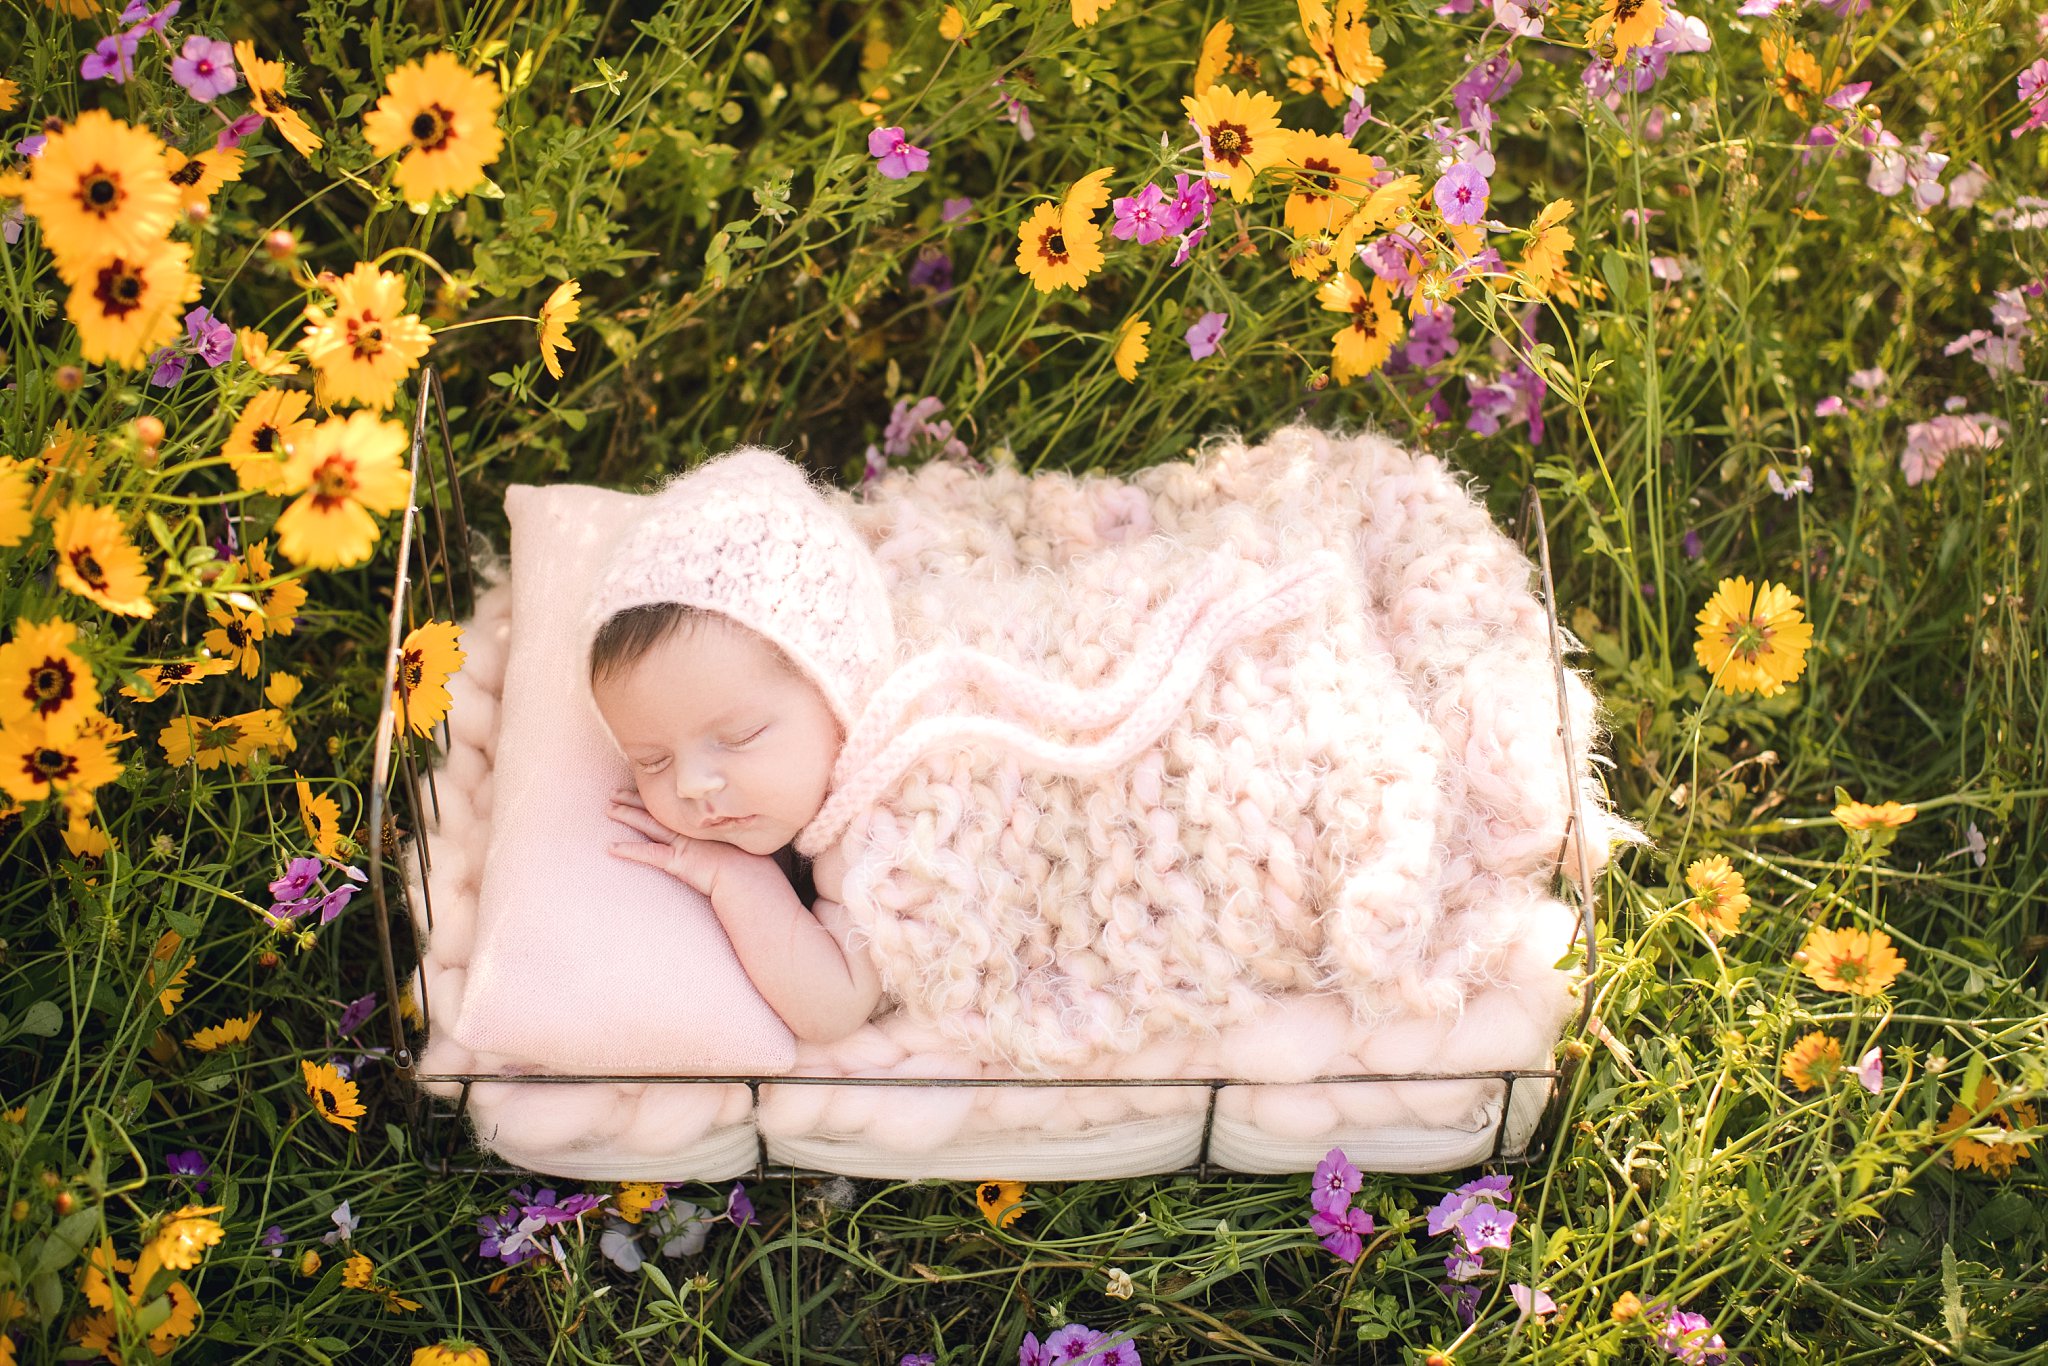 Outdoor Newborn Photographer Jacksonville Fl baby sleeping field of yellow and purple flowers soft fuzzy blush blanket and bonnet